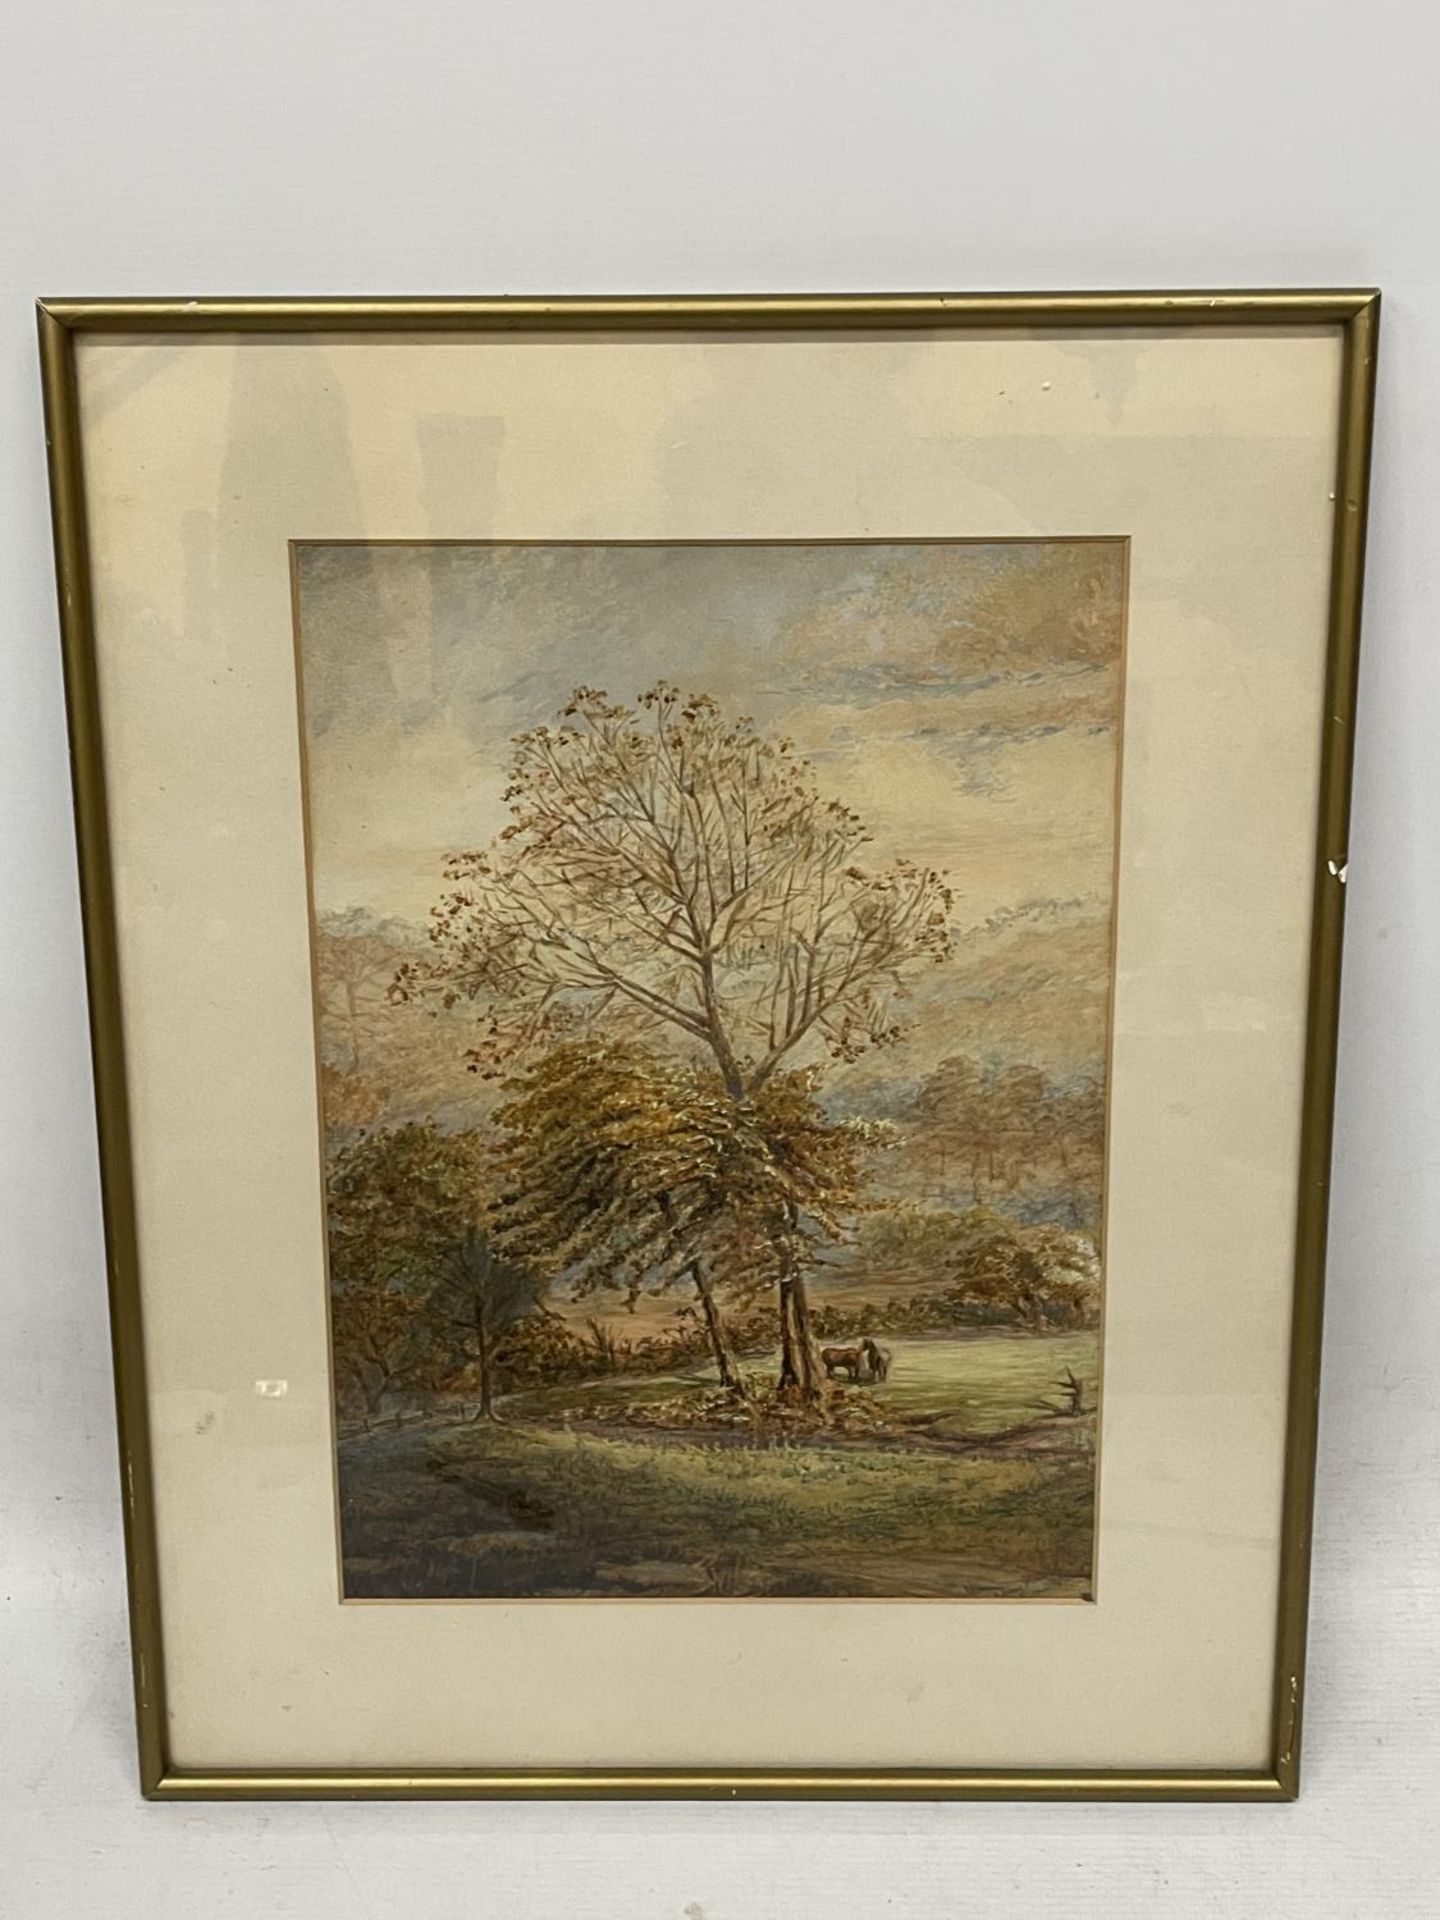 A LATE 19TH CENTURY WATERCOLOUR OF TWO HORSES IN A WOODLAND INDISTINCTLY SIGNED, 37CM X 26CM, FRAMED